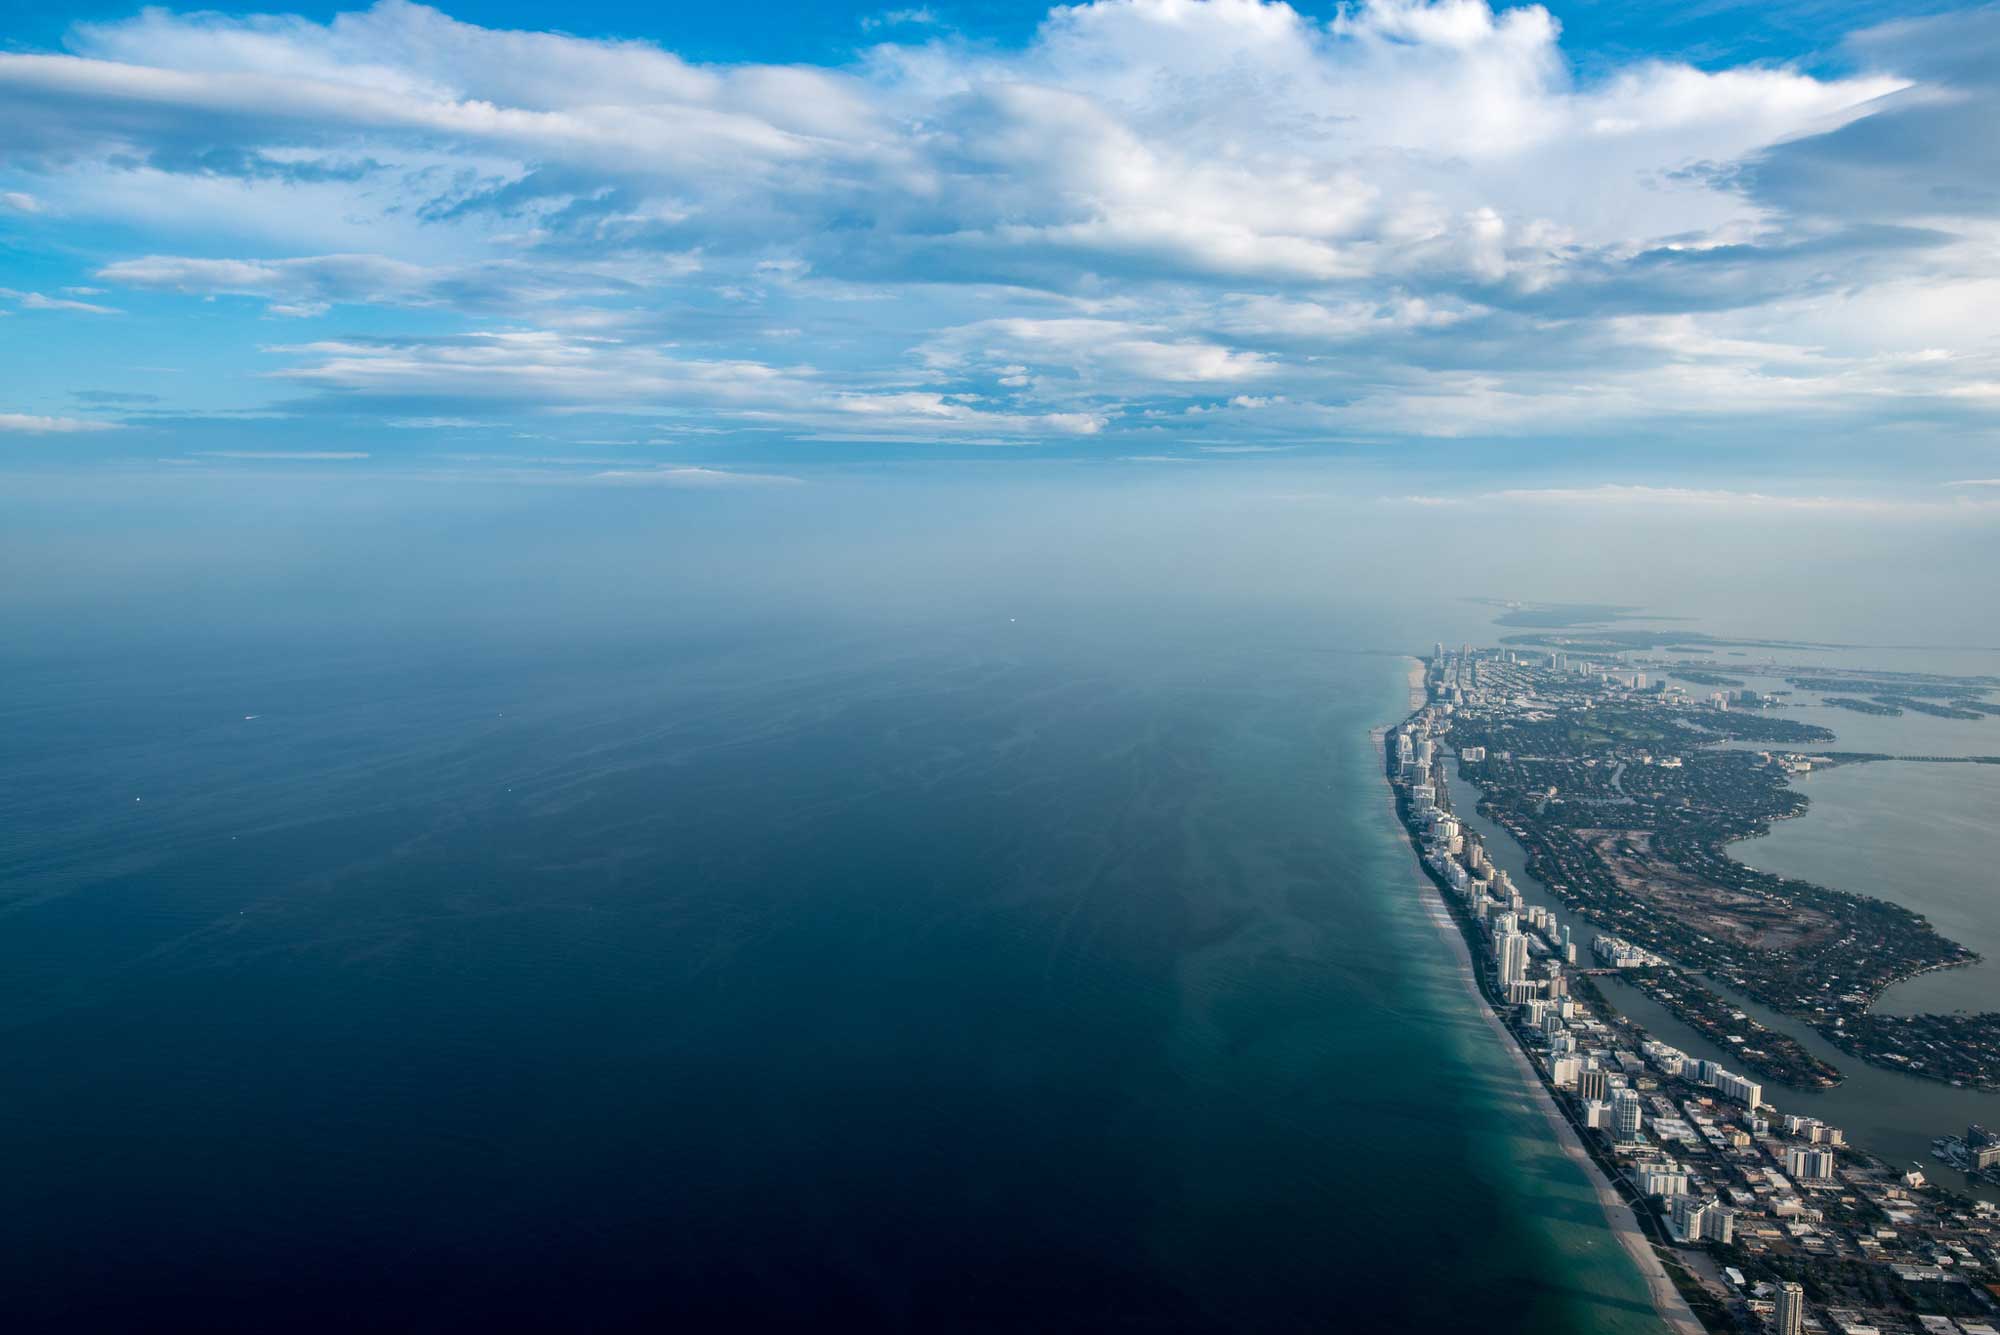 Photograph from the air of Miami Beach, Florida.